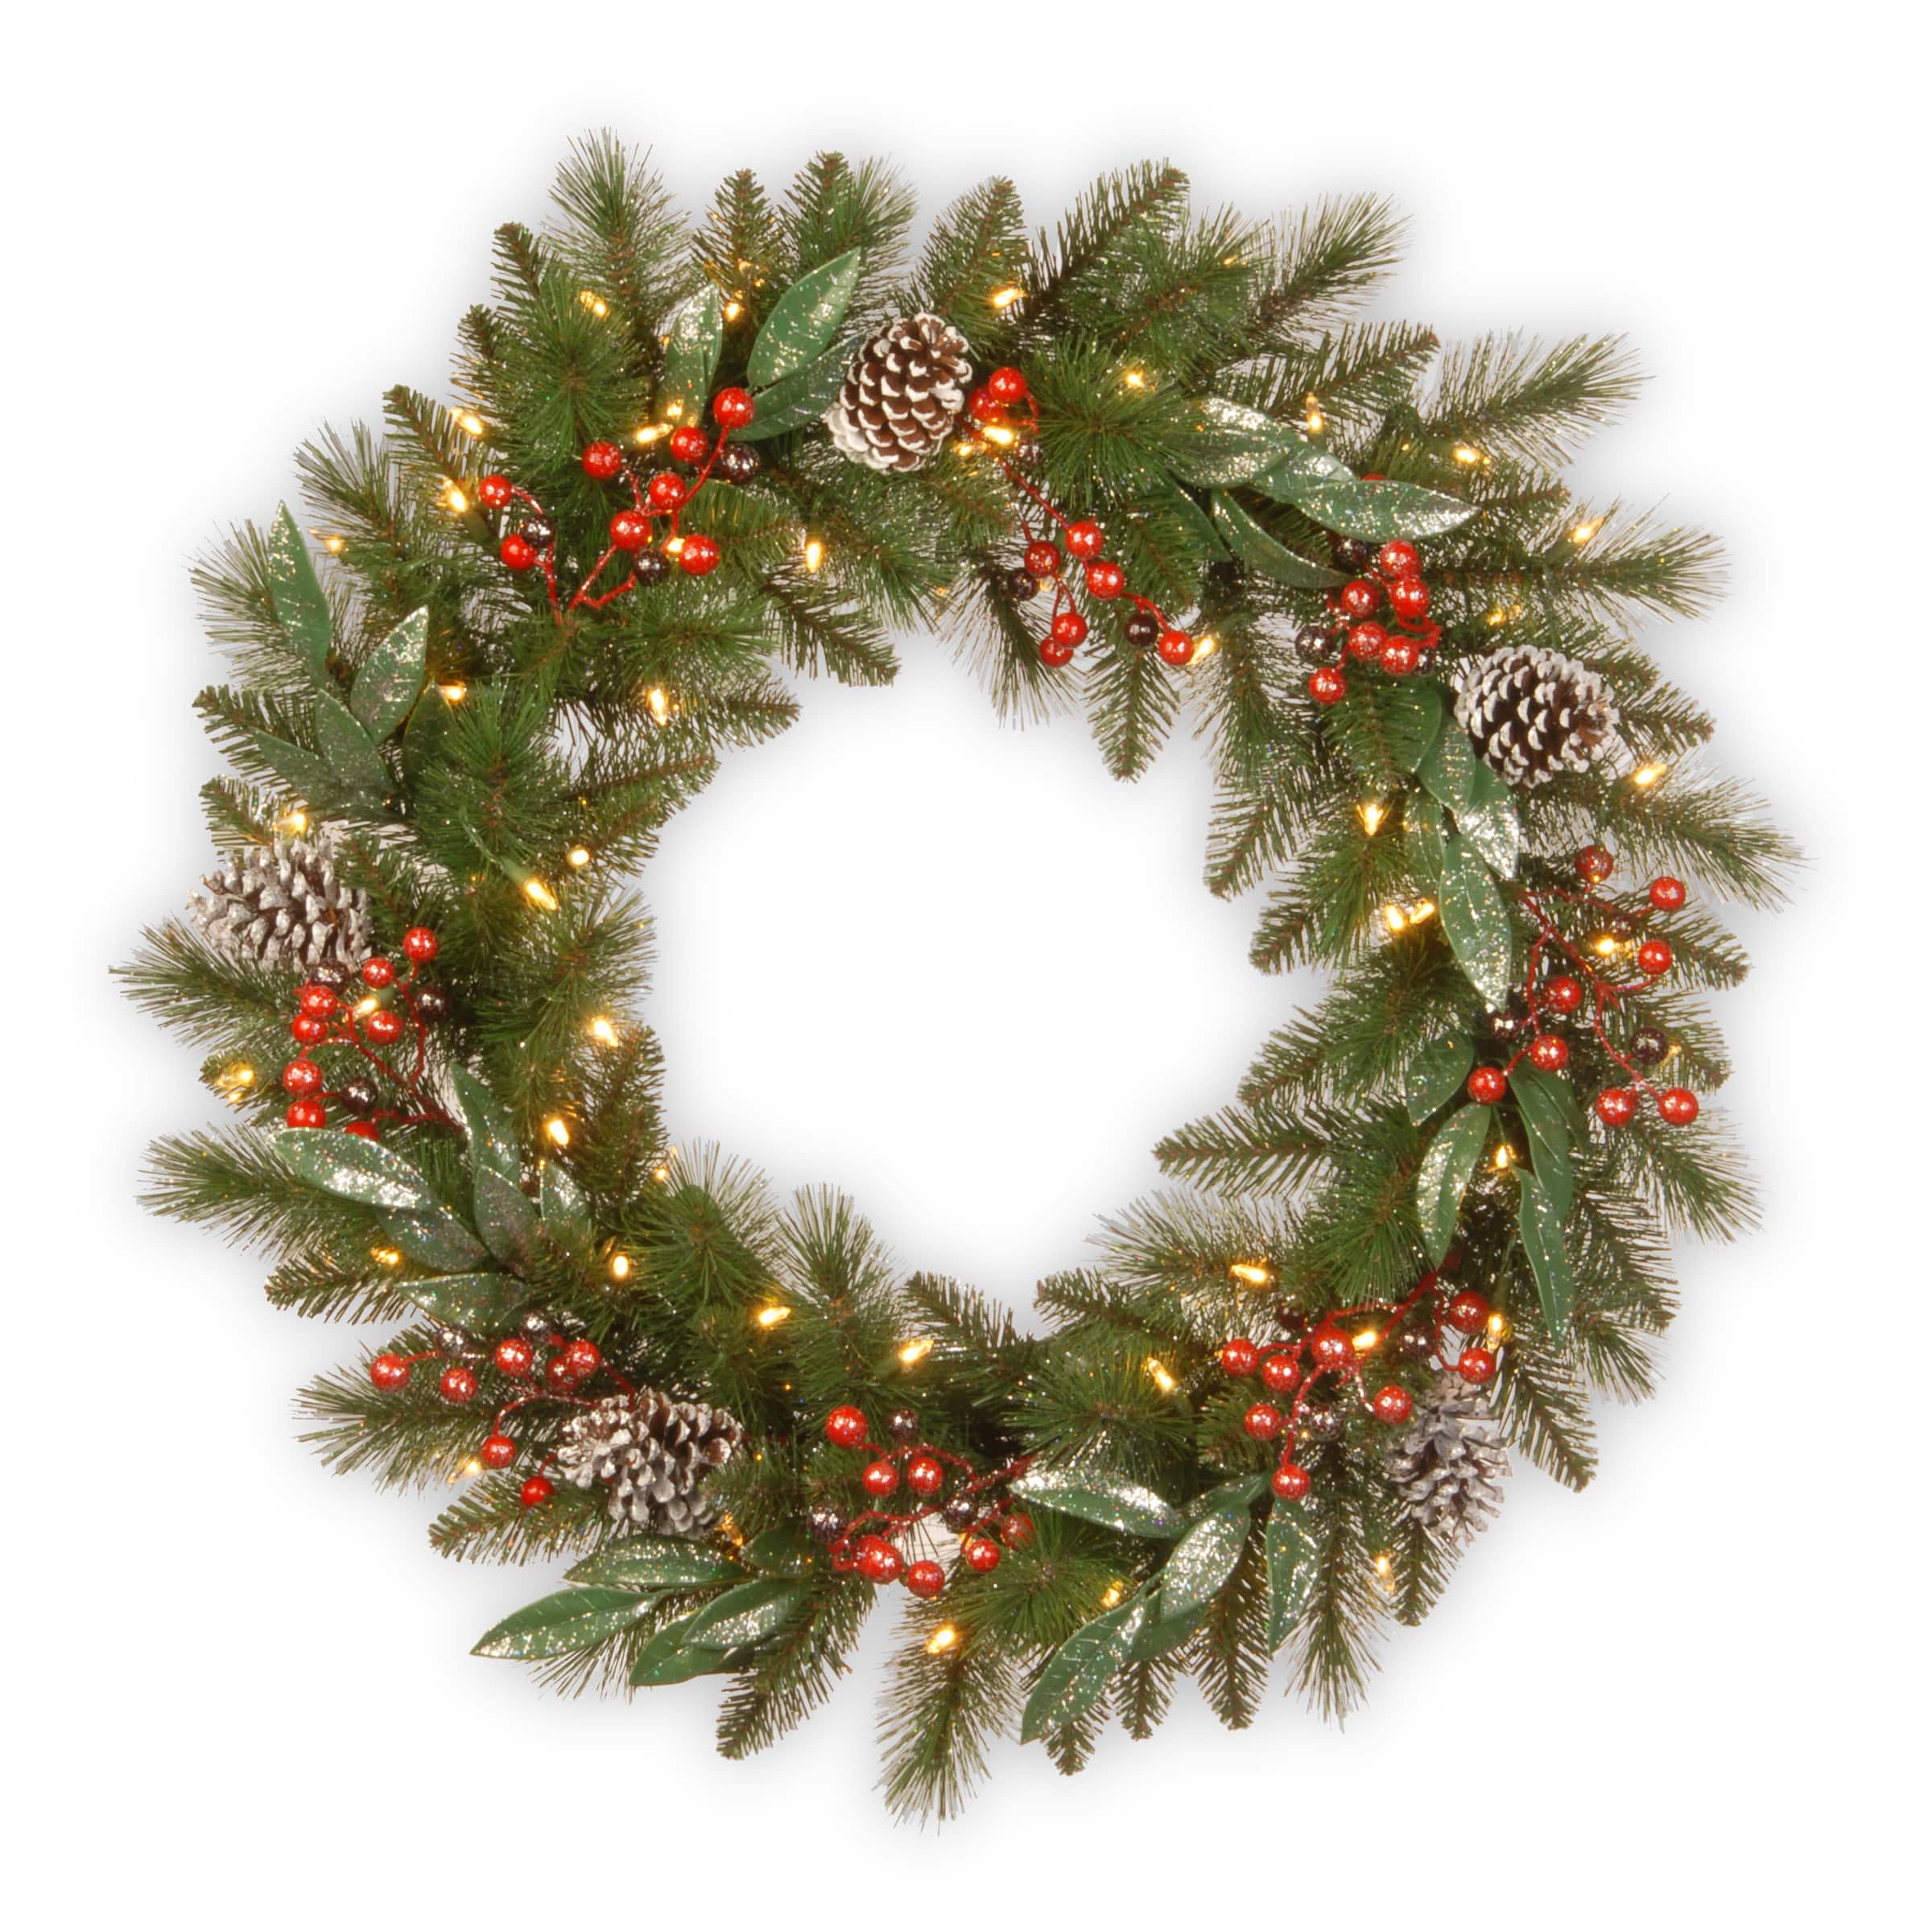 Details about   24" Christmas Wasatch Mountain Cashmere Ming Pine Wreath With Pine Cones 